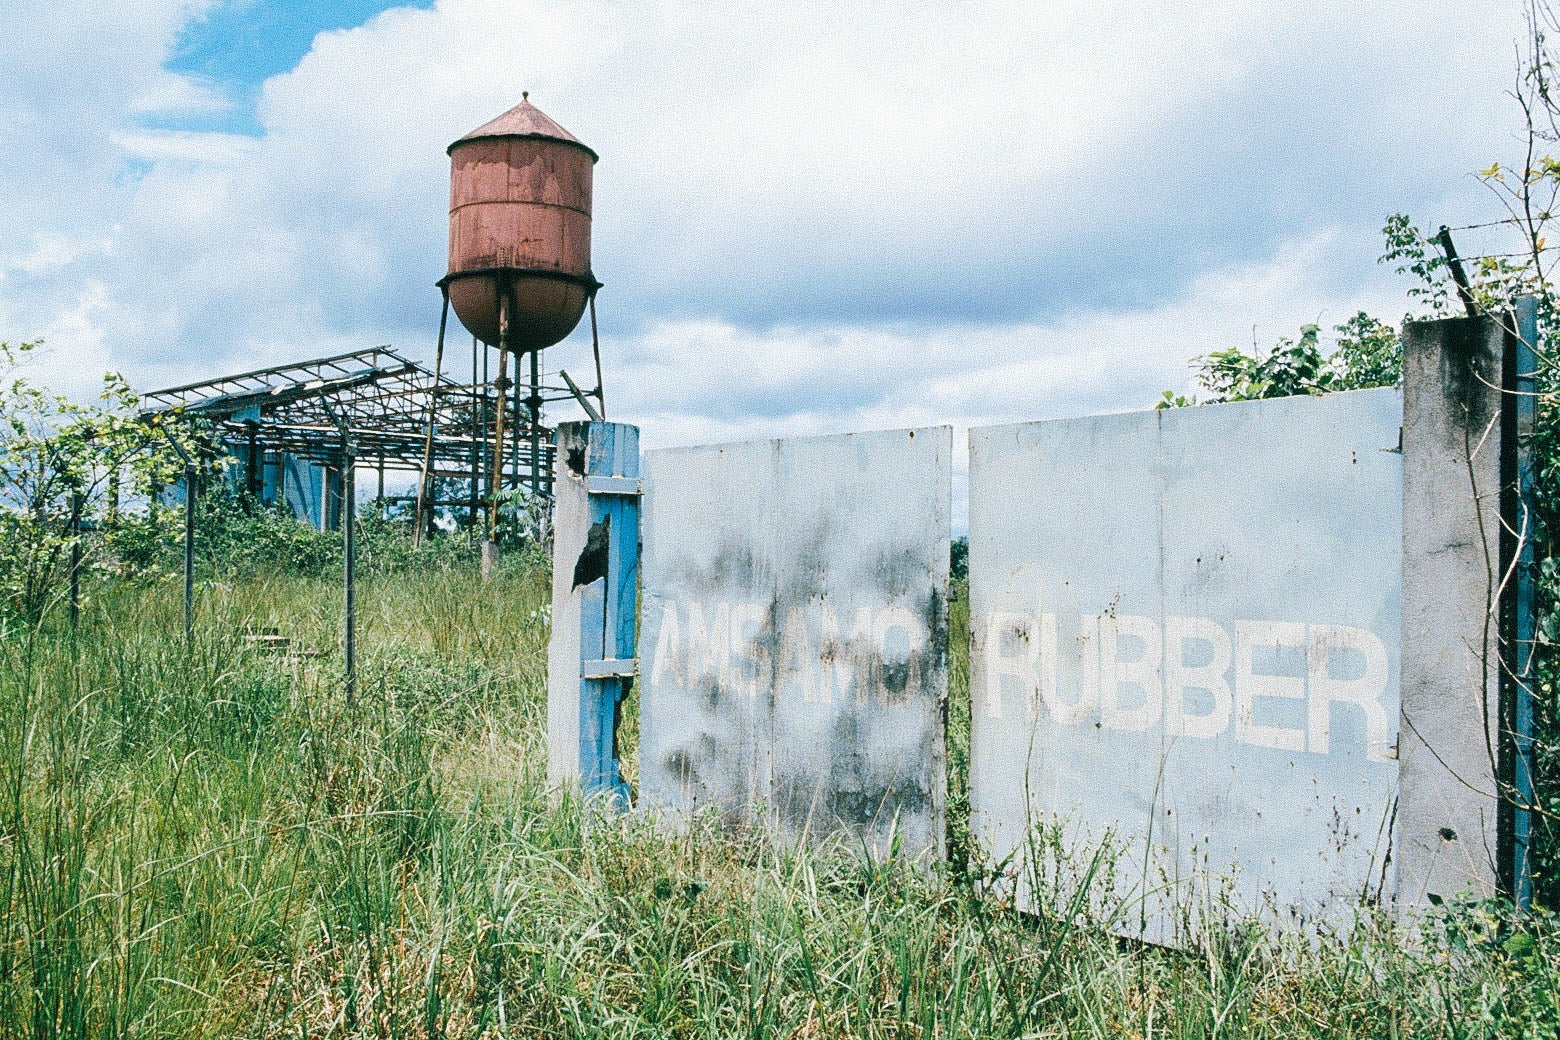 A burned, faded sign bearing the name of a rubber brand is seen in front of a water tower.